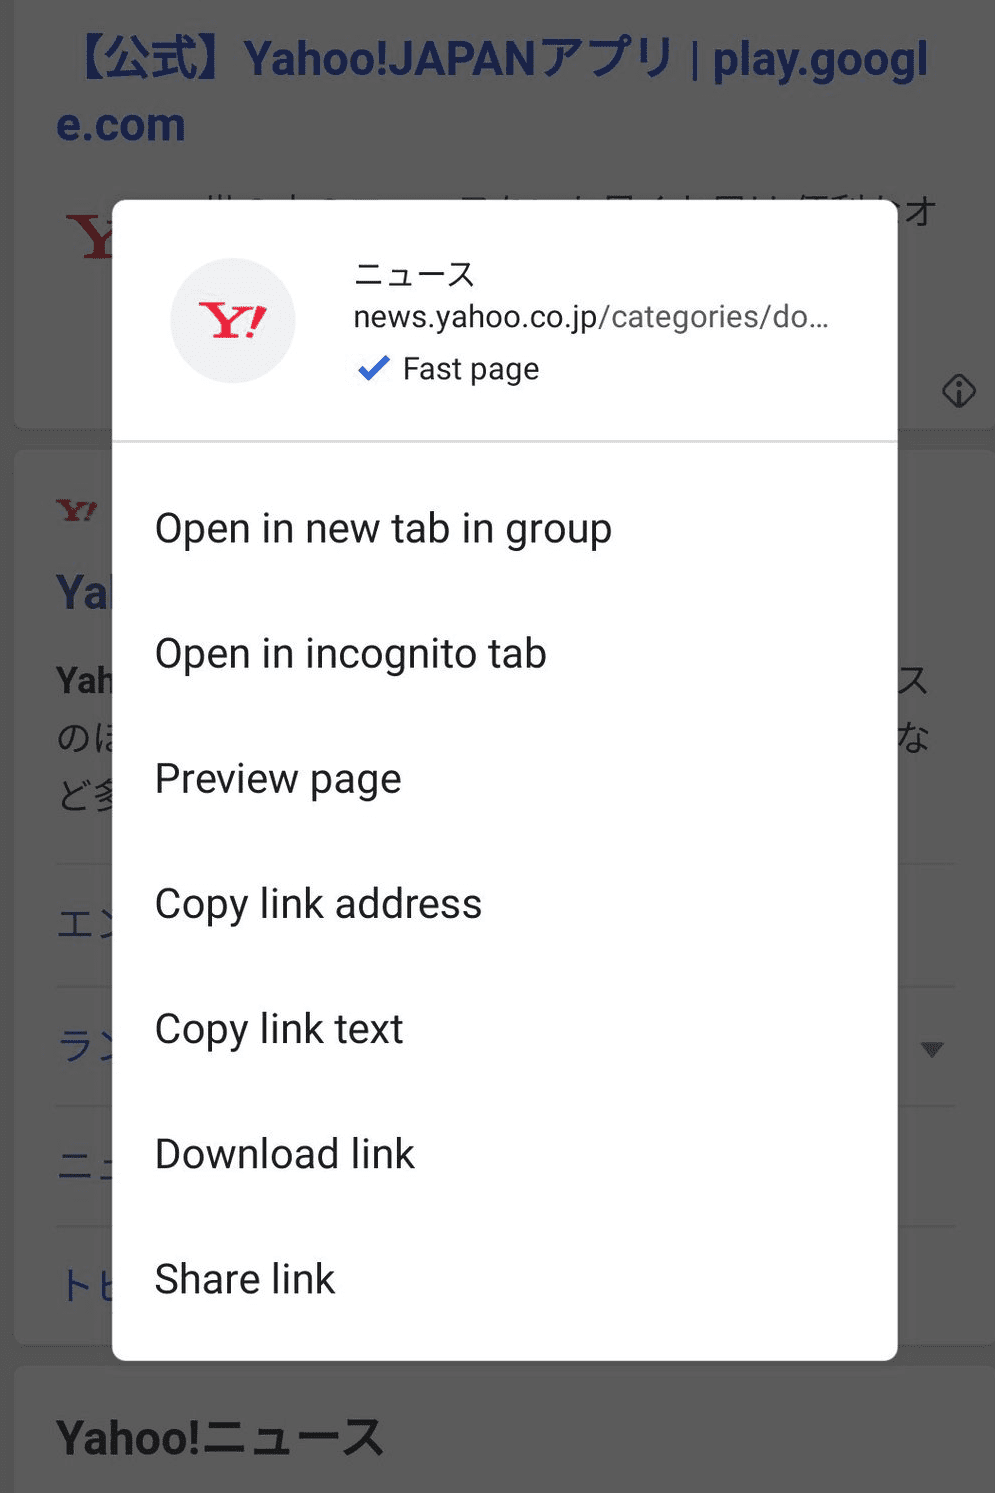 Fast page label in Chrome on Android.